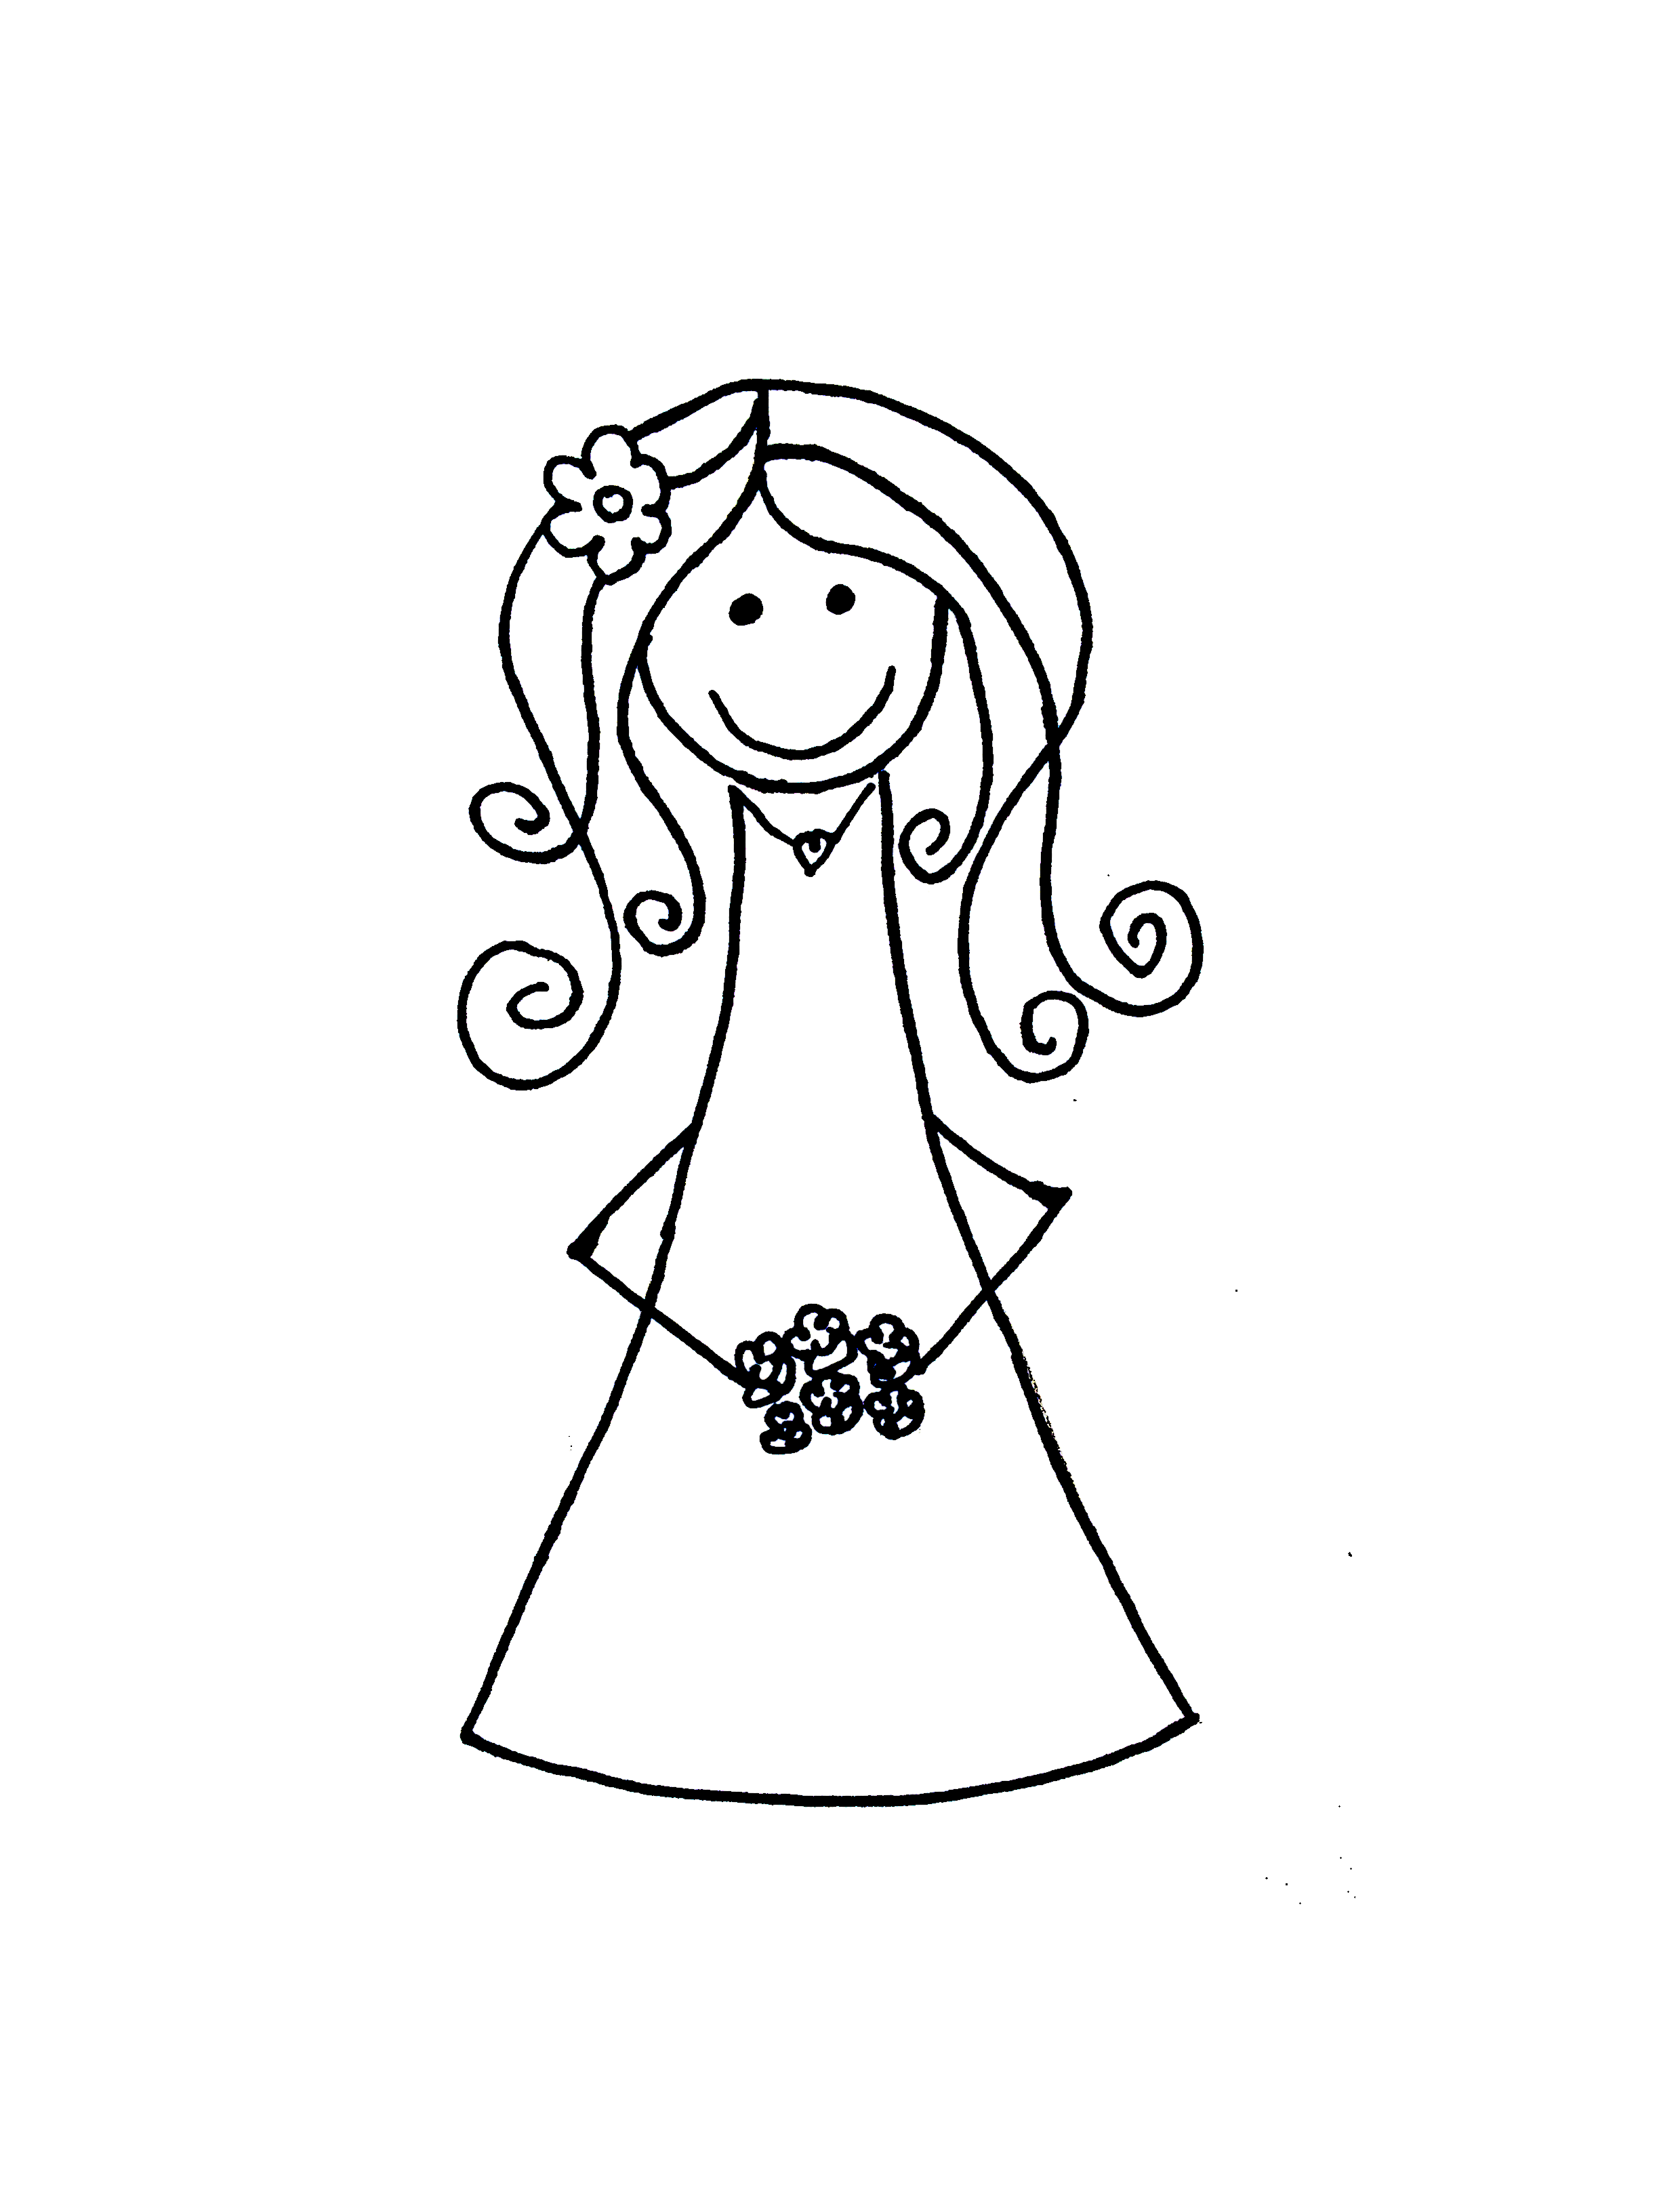 bridal clipart black and white